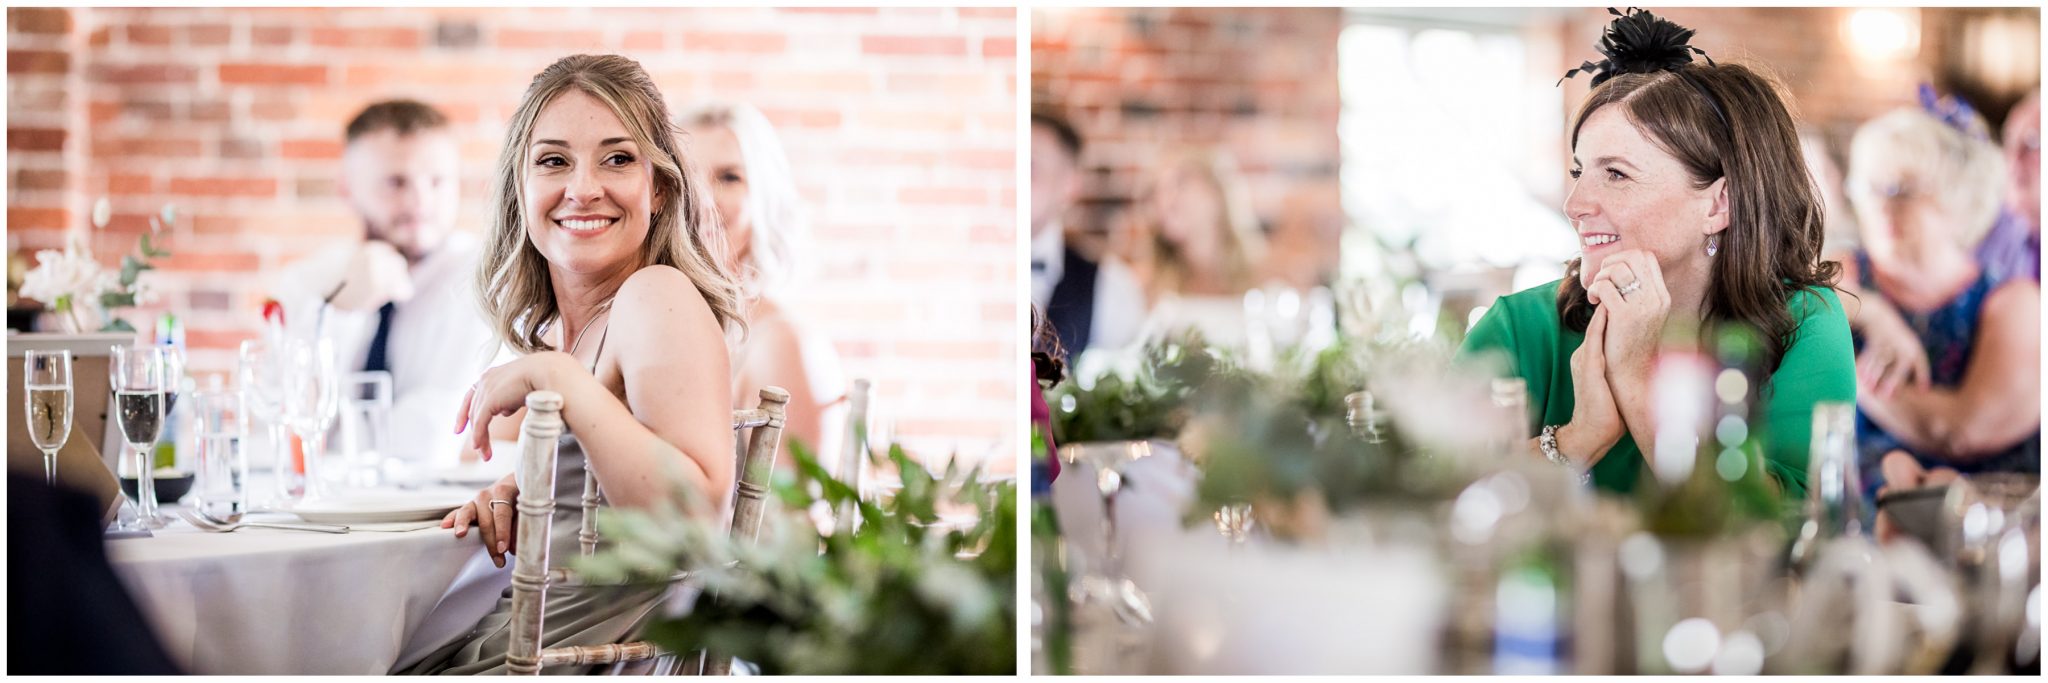 Candid photos of wedding guests during the speeches